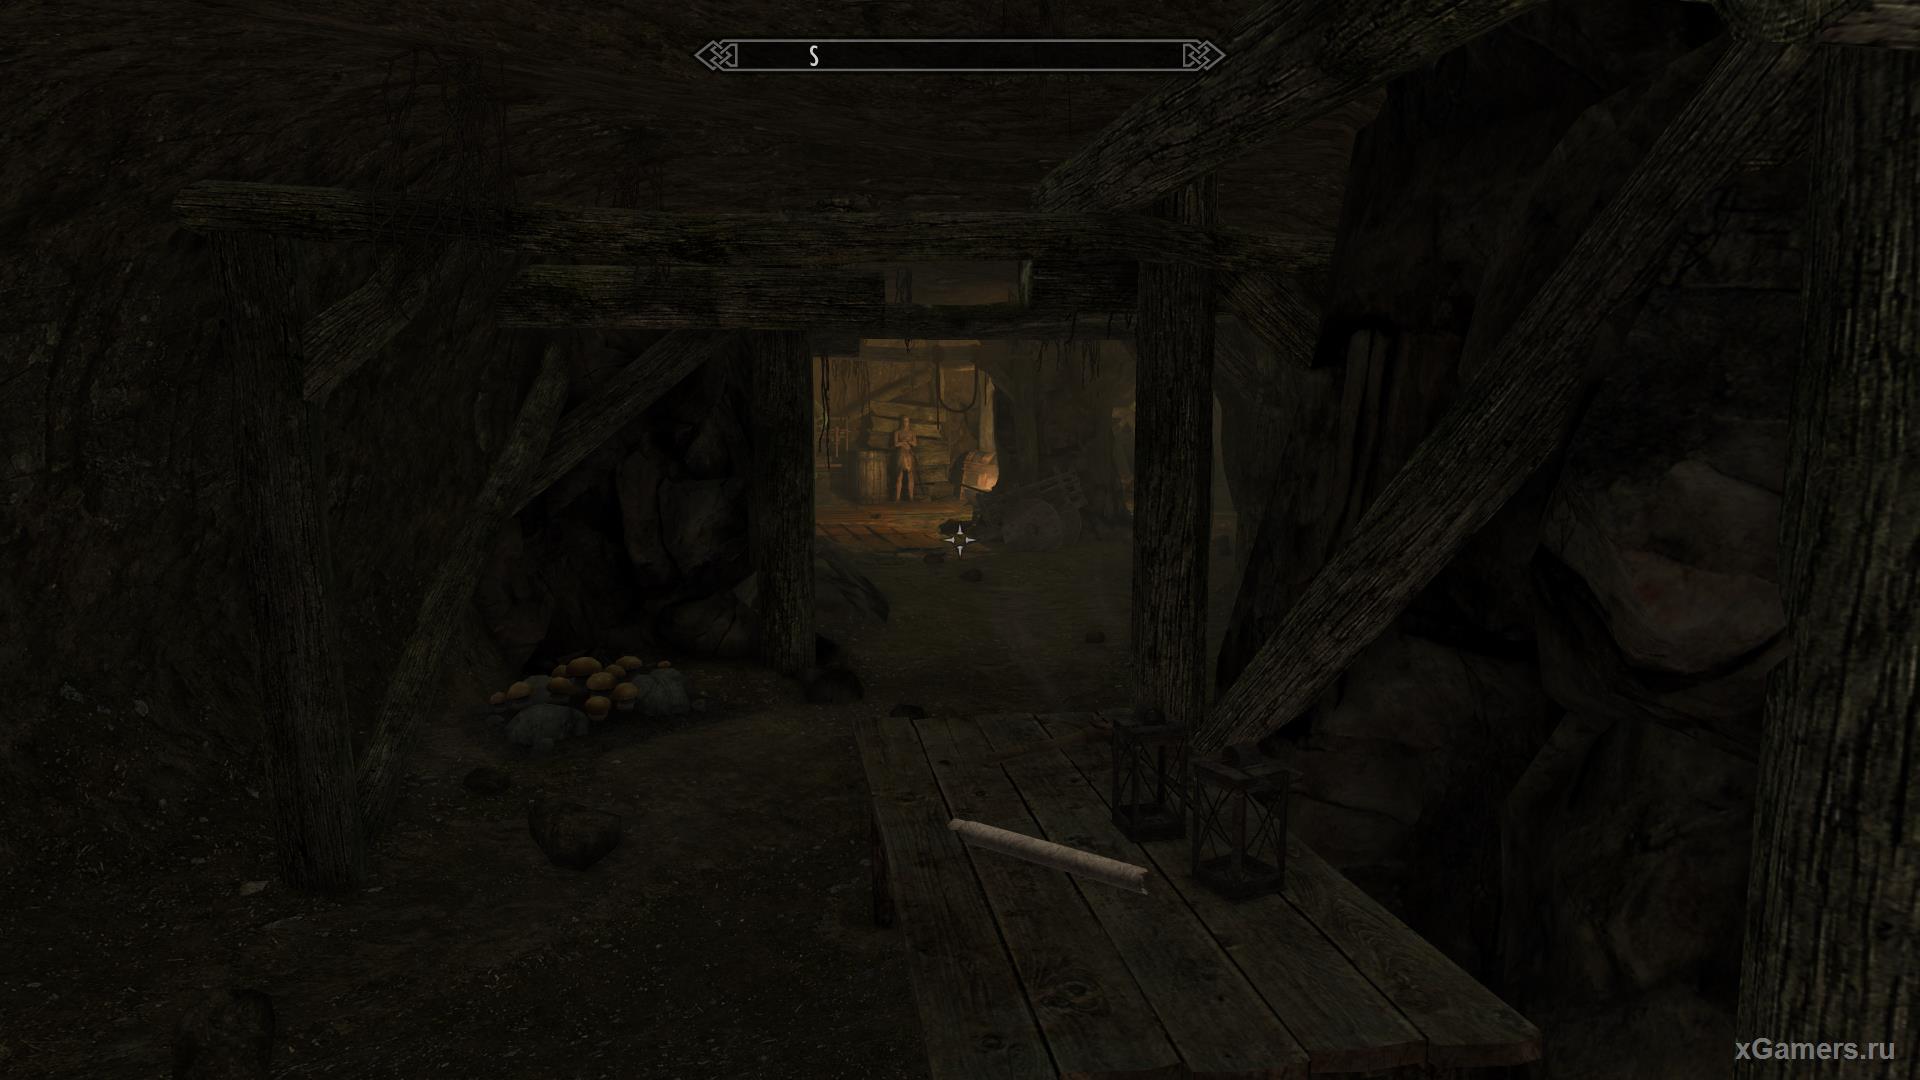 Skyrim Boethiah s Calling - to trap someone in a sanctuary and kill him